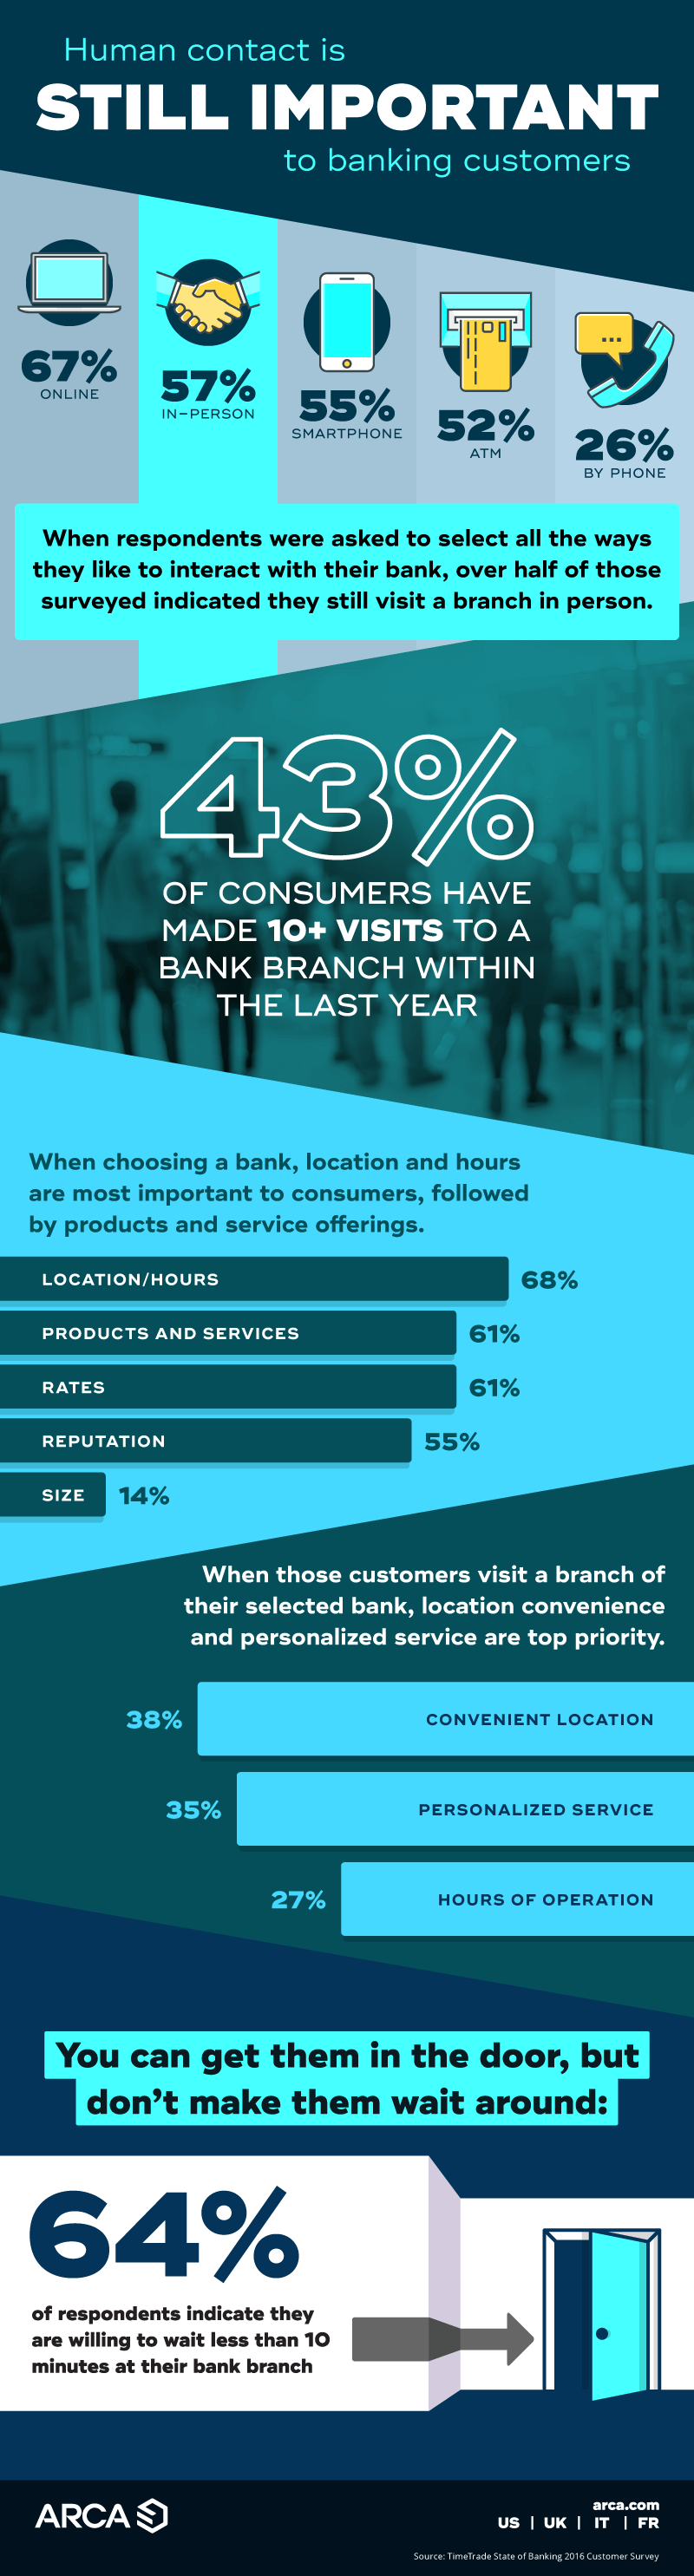 Human Contact in Banking